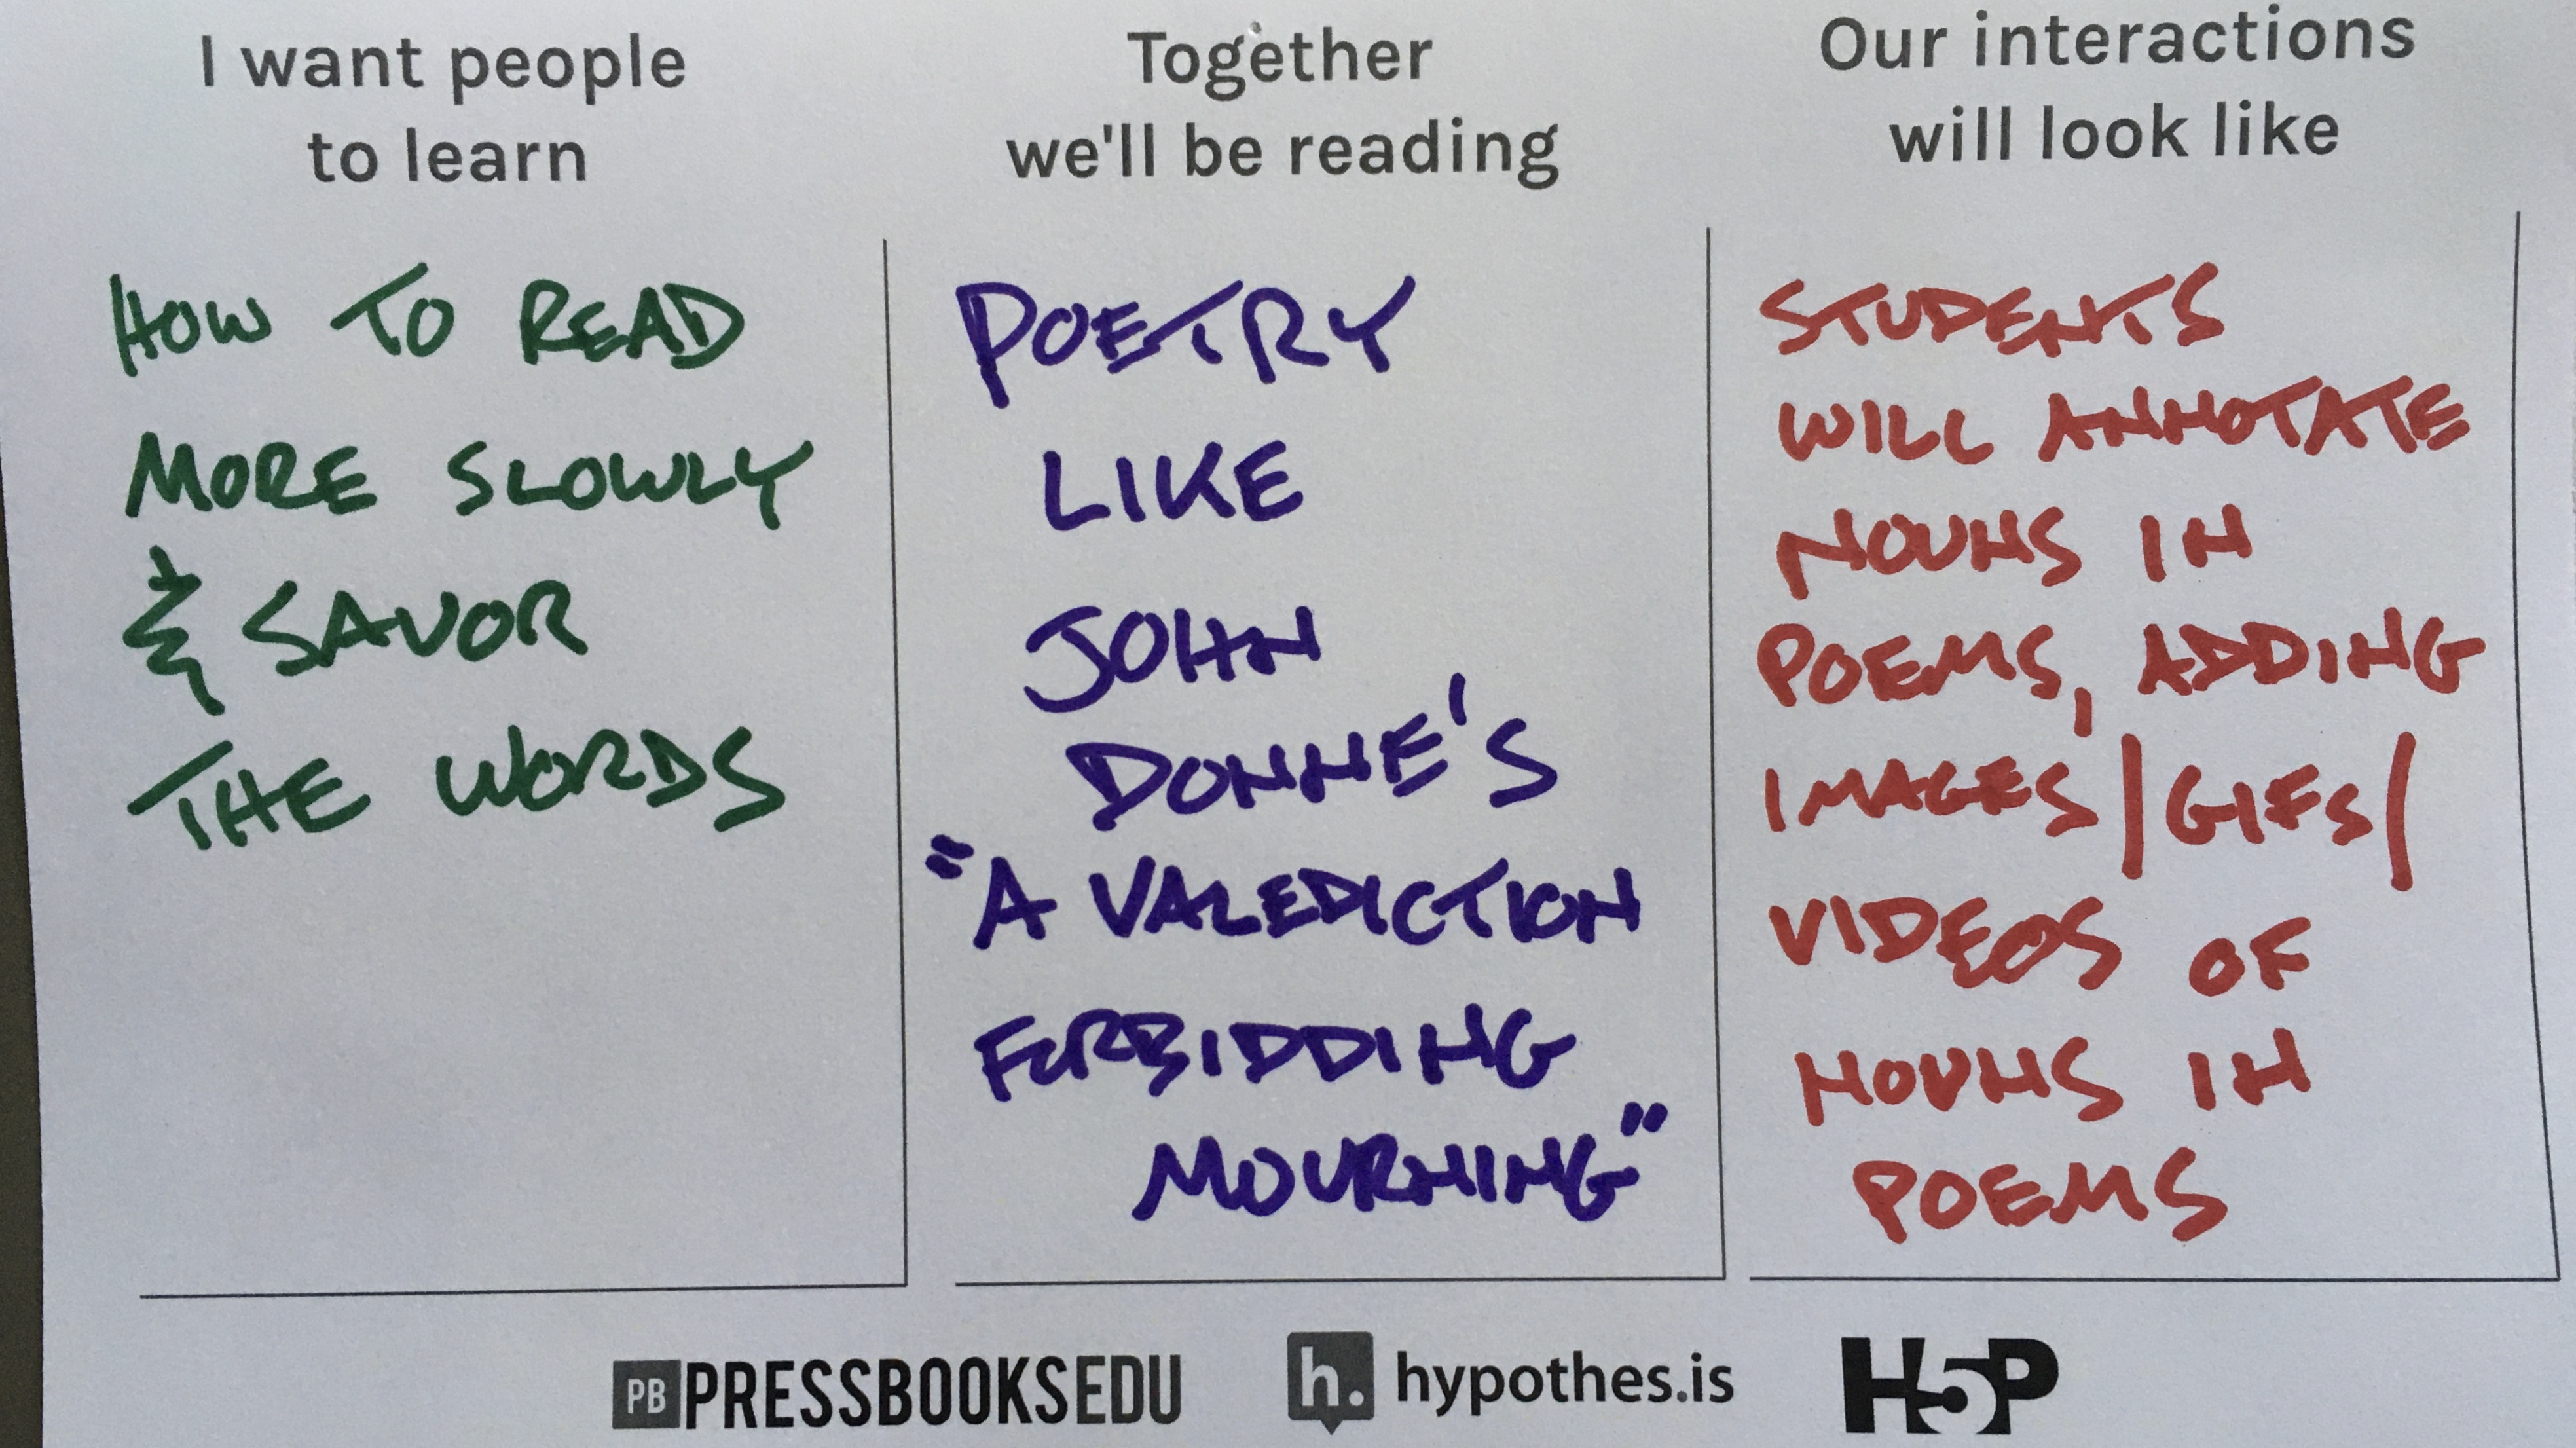 A handout describing a tiny social reading activity, with logos from Pressbooks, Hypothesis and H5P across the bottom.